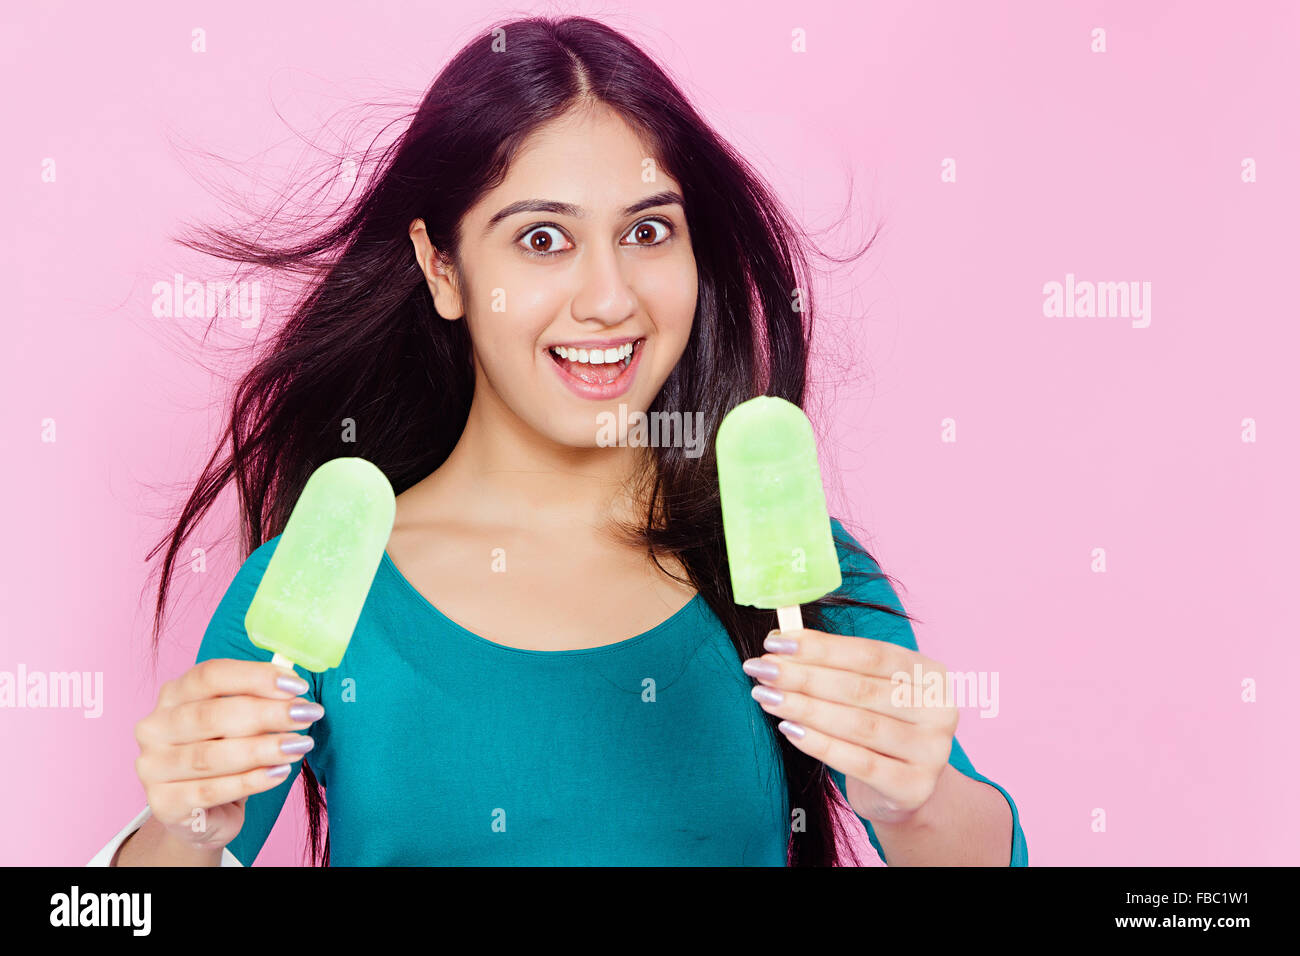 1 indian Young Woman Eating Ice Cream Stock Photo